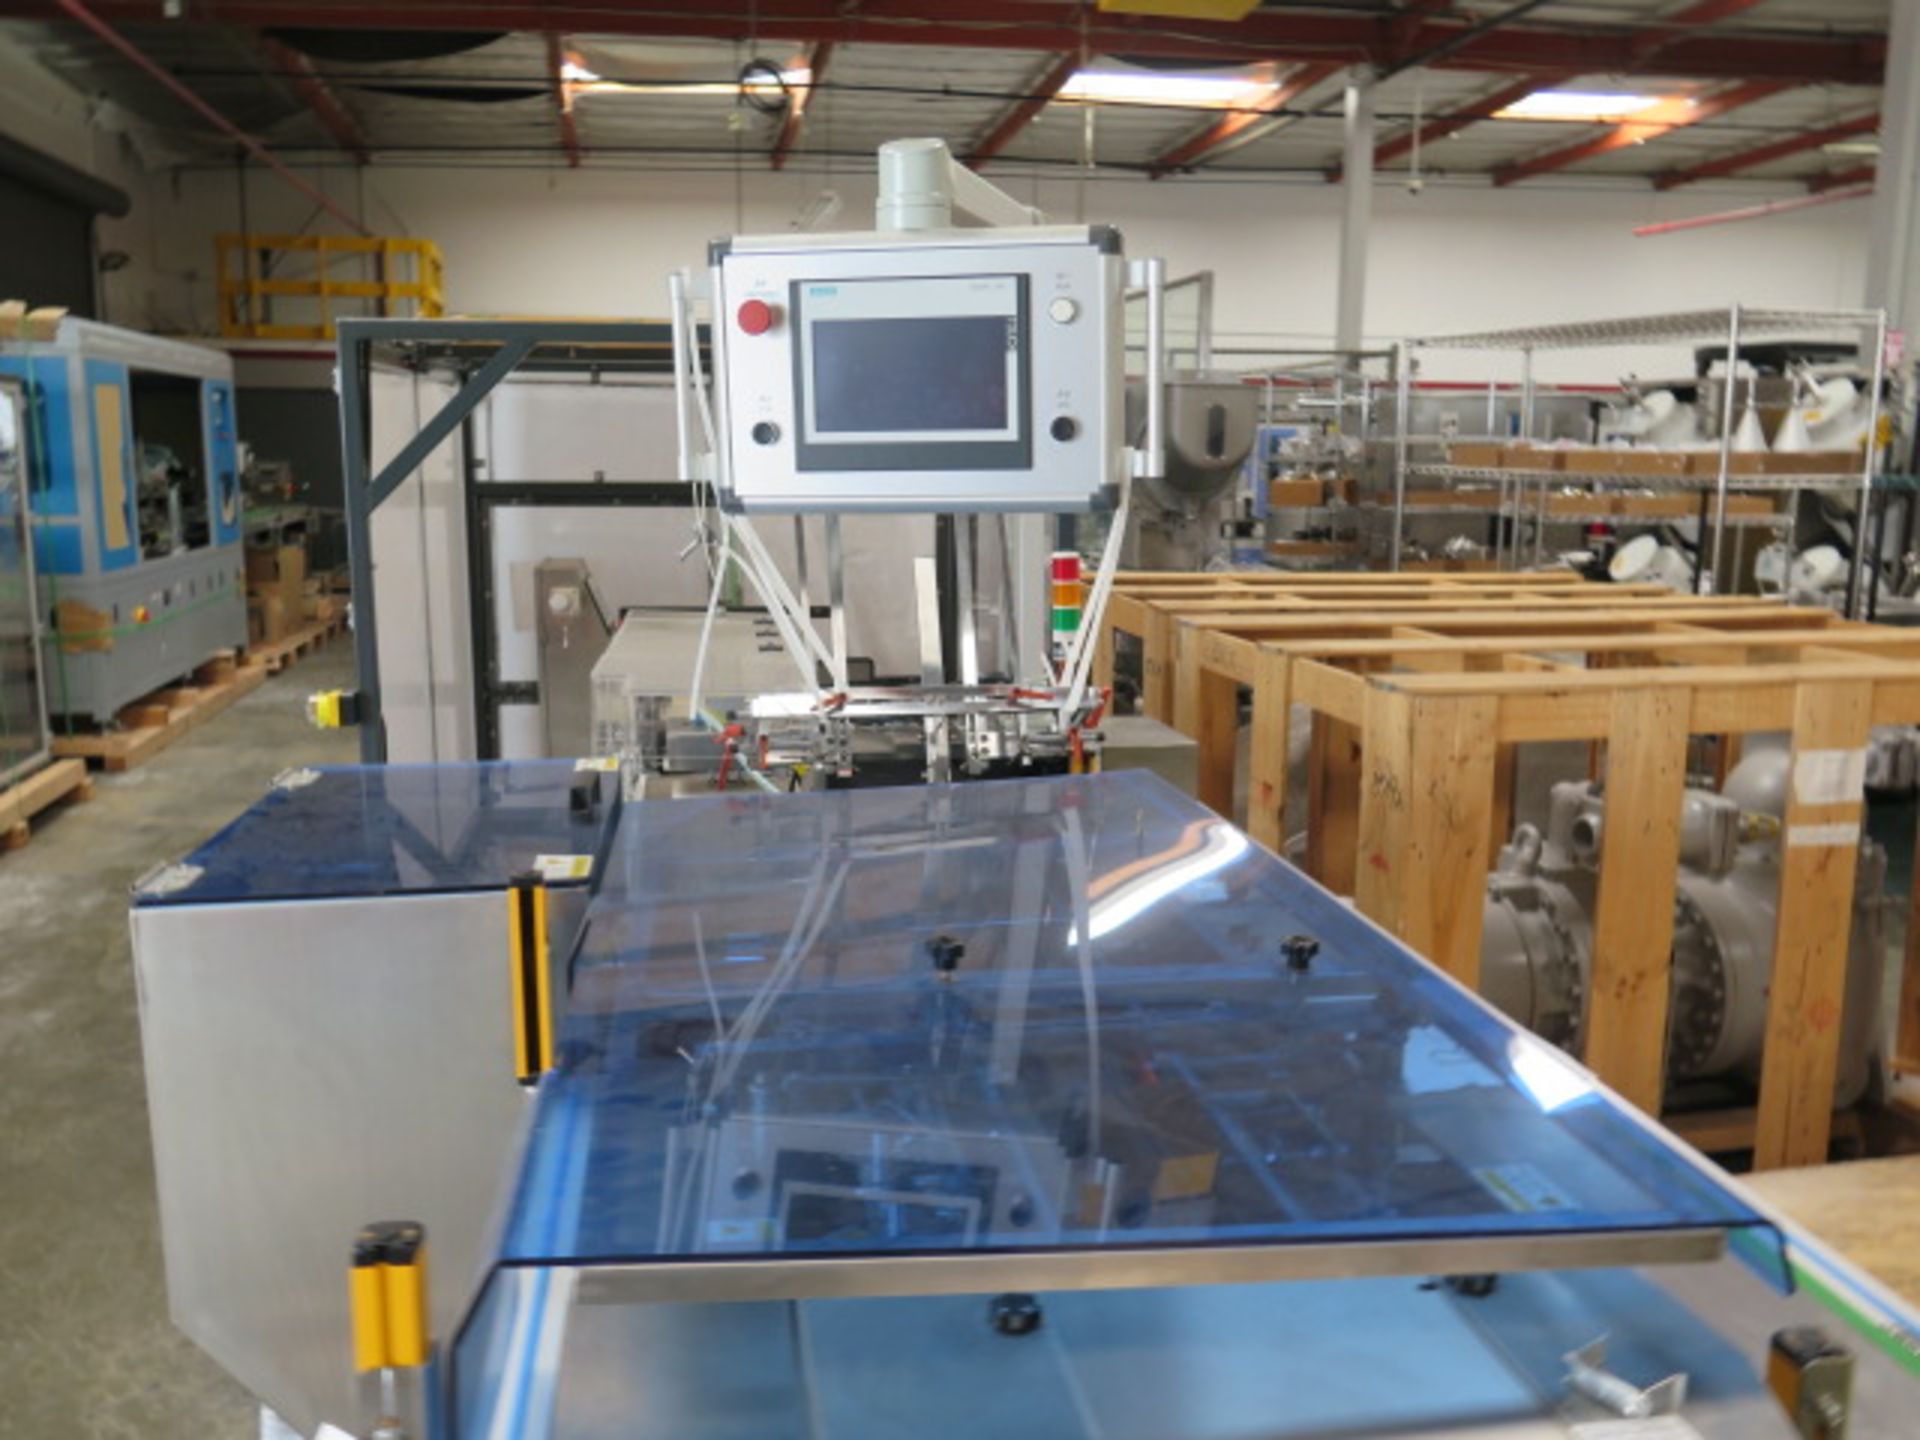 2022(NEW) Rongyu RY-ZH-80 Packaging Machine s/n220302 w/Siemens Smart Line Touch Controls,SOLD AS IS - Image 4 of 48